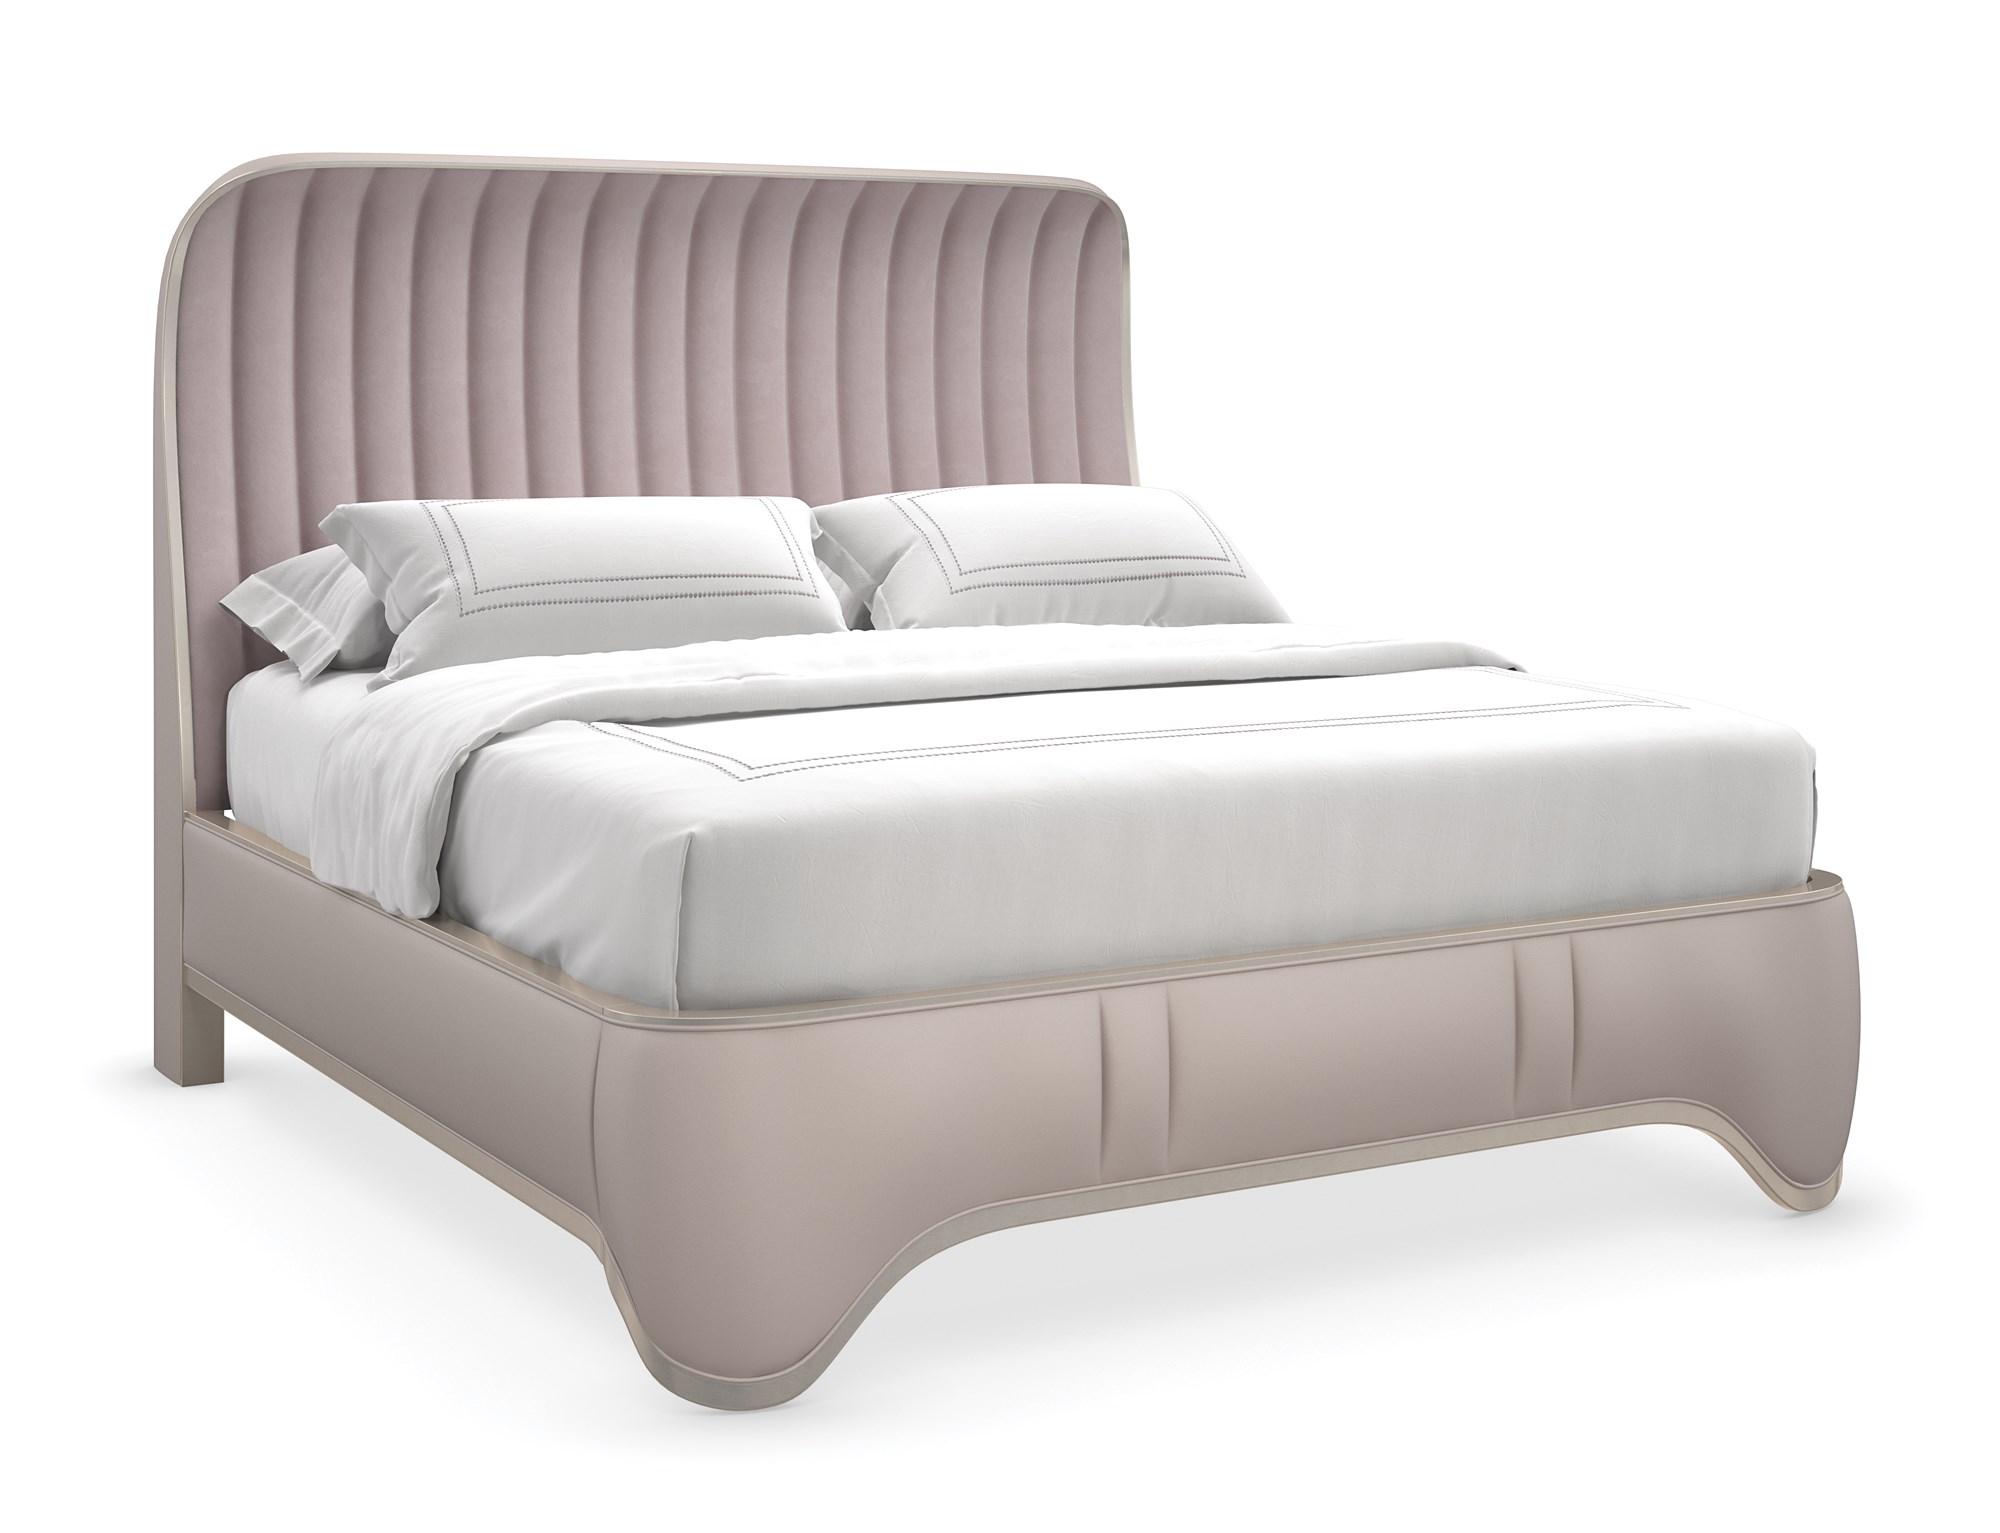 

    
Diamond Chenille Fabric Warm Metallic Finish THE OXFORD UPH QUEEN BED by Caracole
